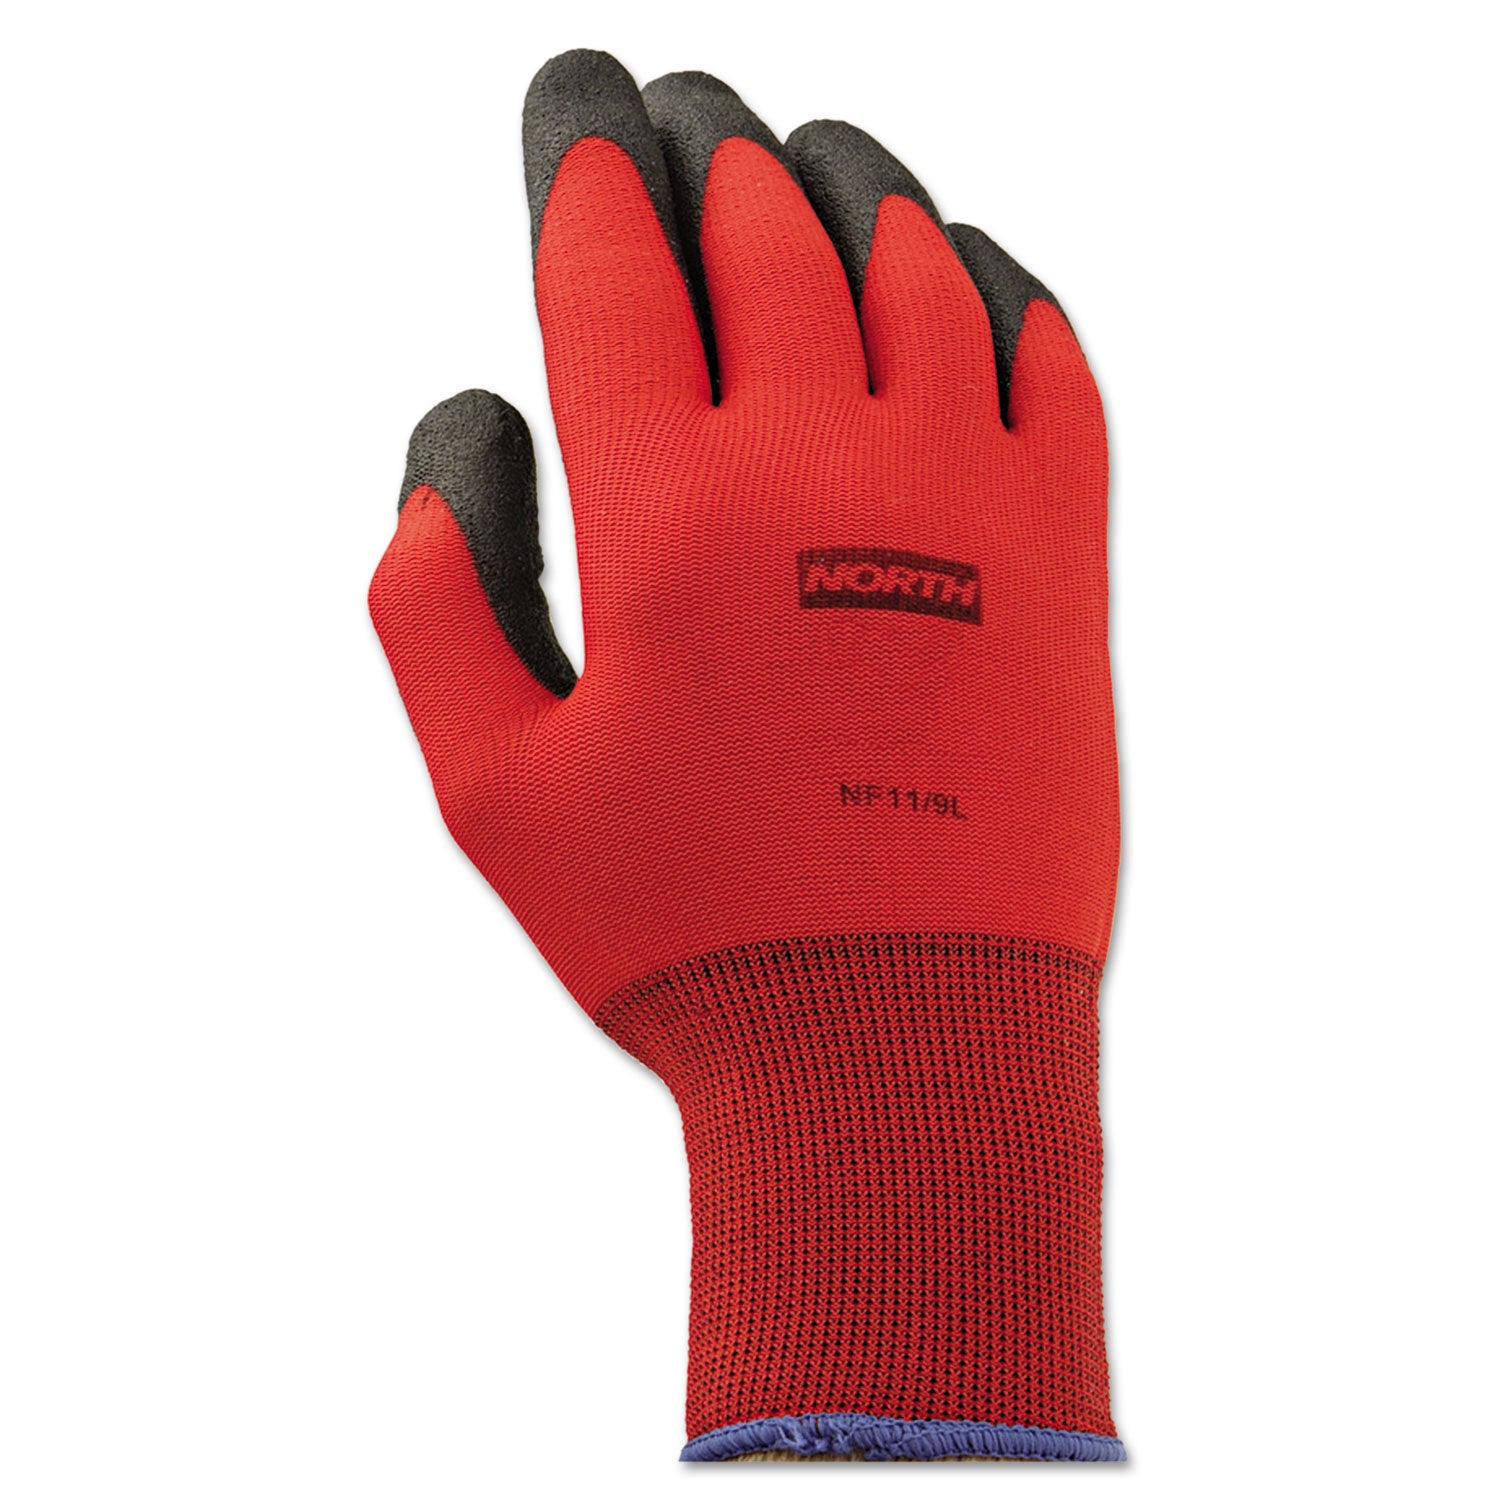 NorthFlex Red Foamed PVC Gloves, Red/Black, Size 9/Large, 12 Pairs - 